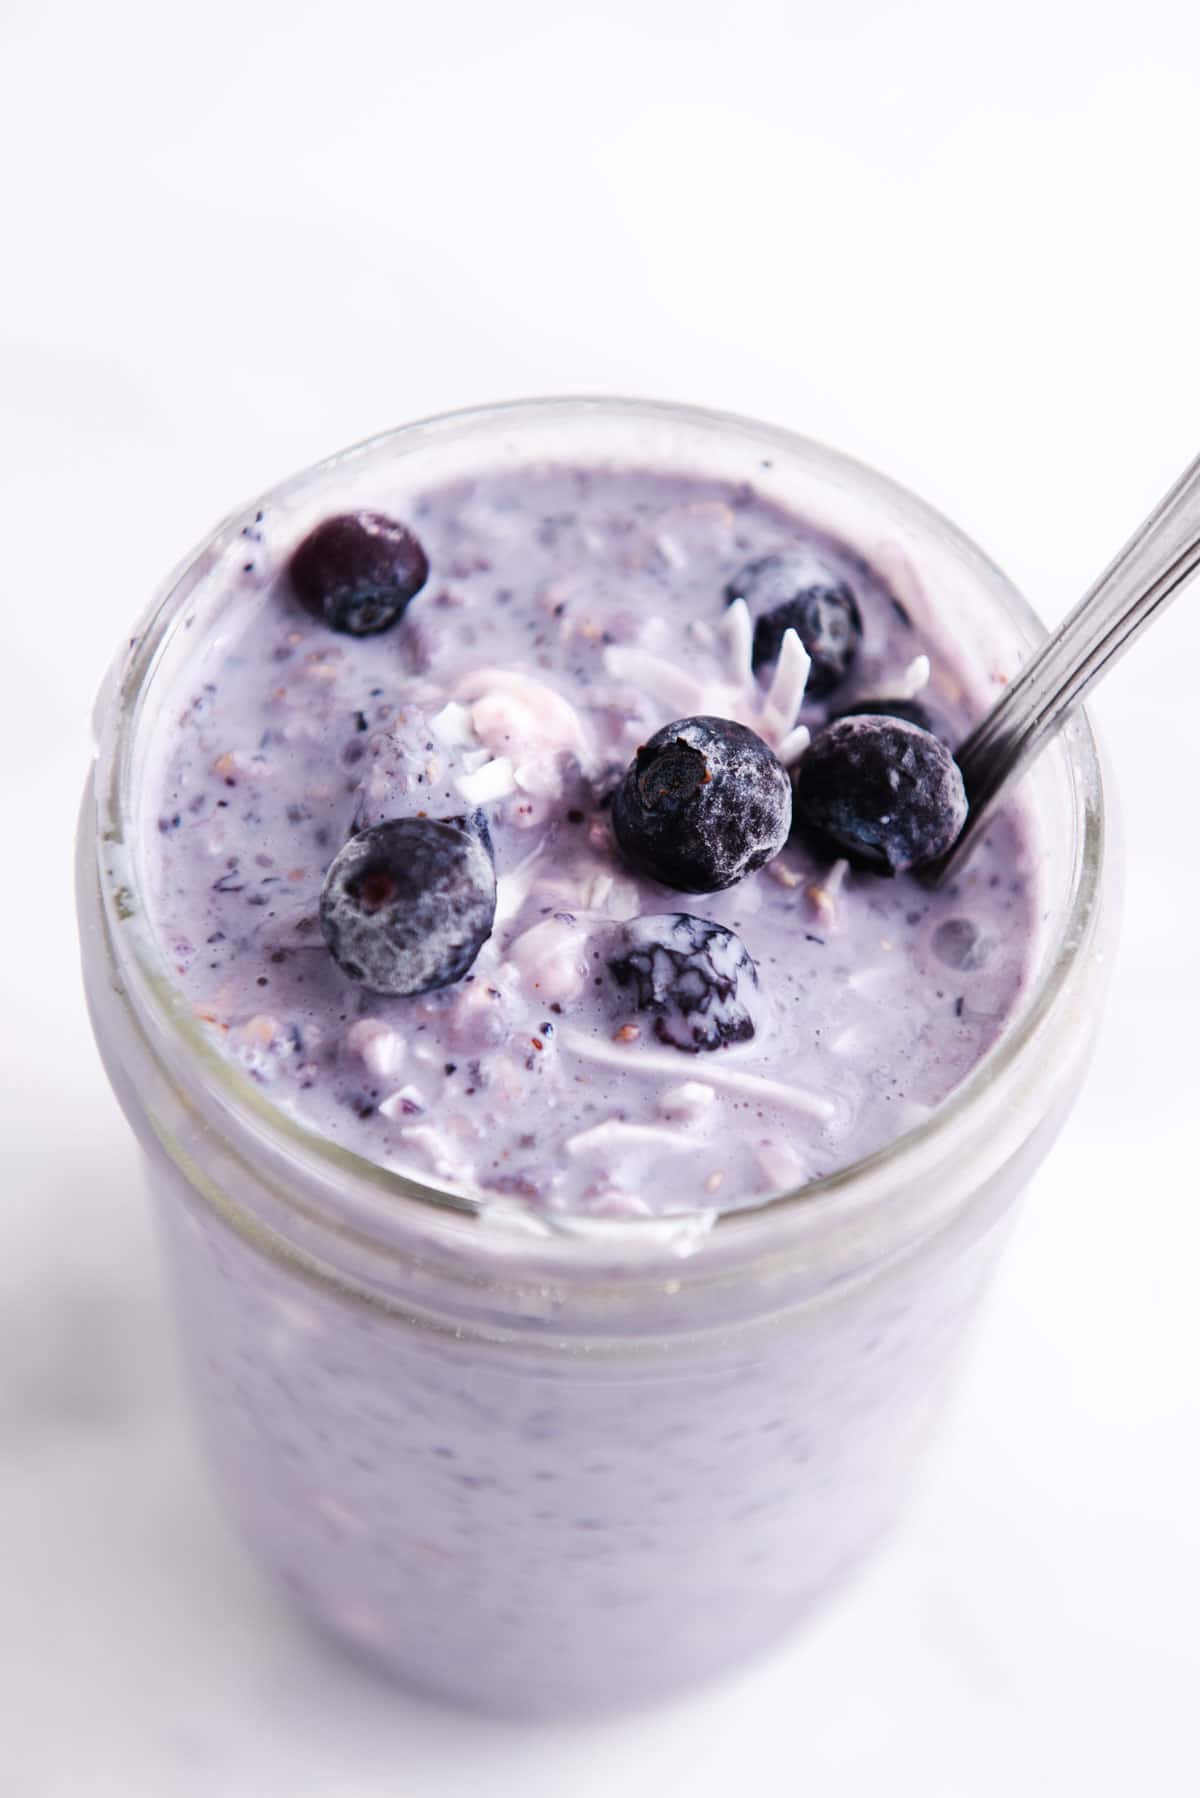 Purple blueberry overnight oats in a glass jar topped with blueberries.